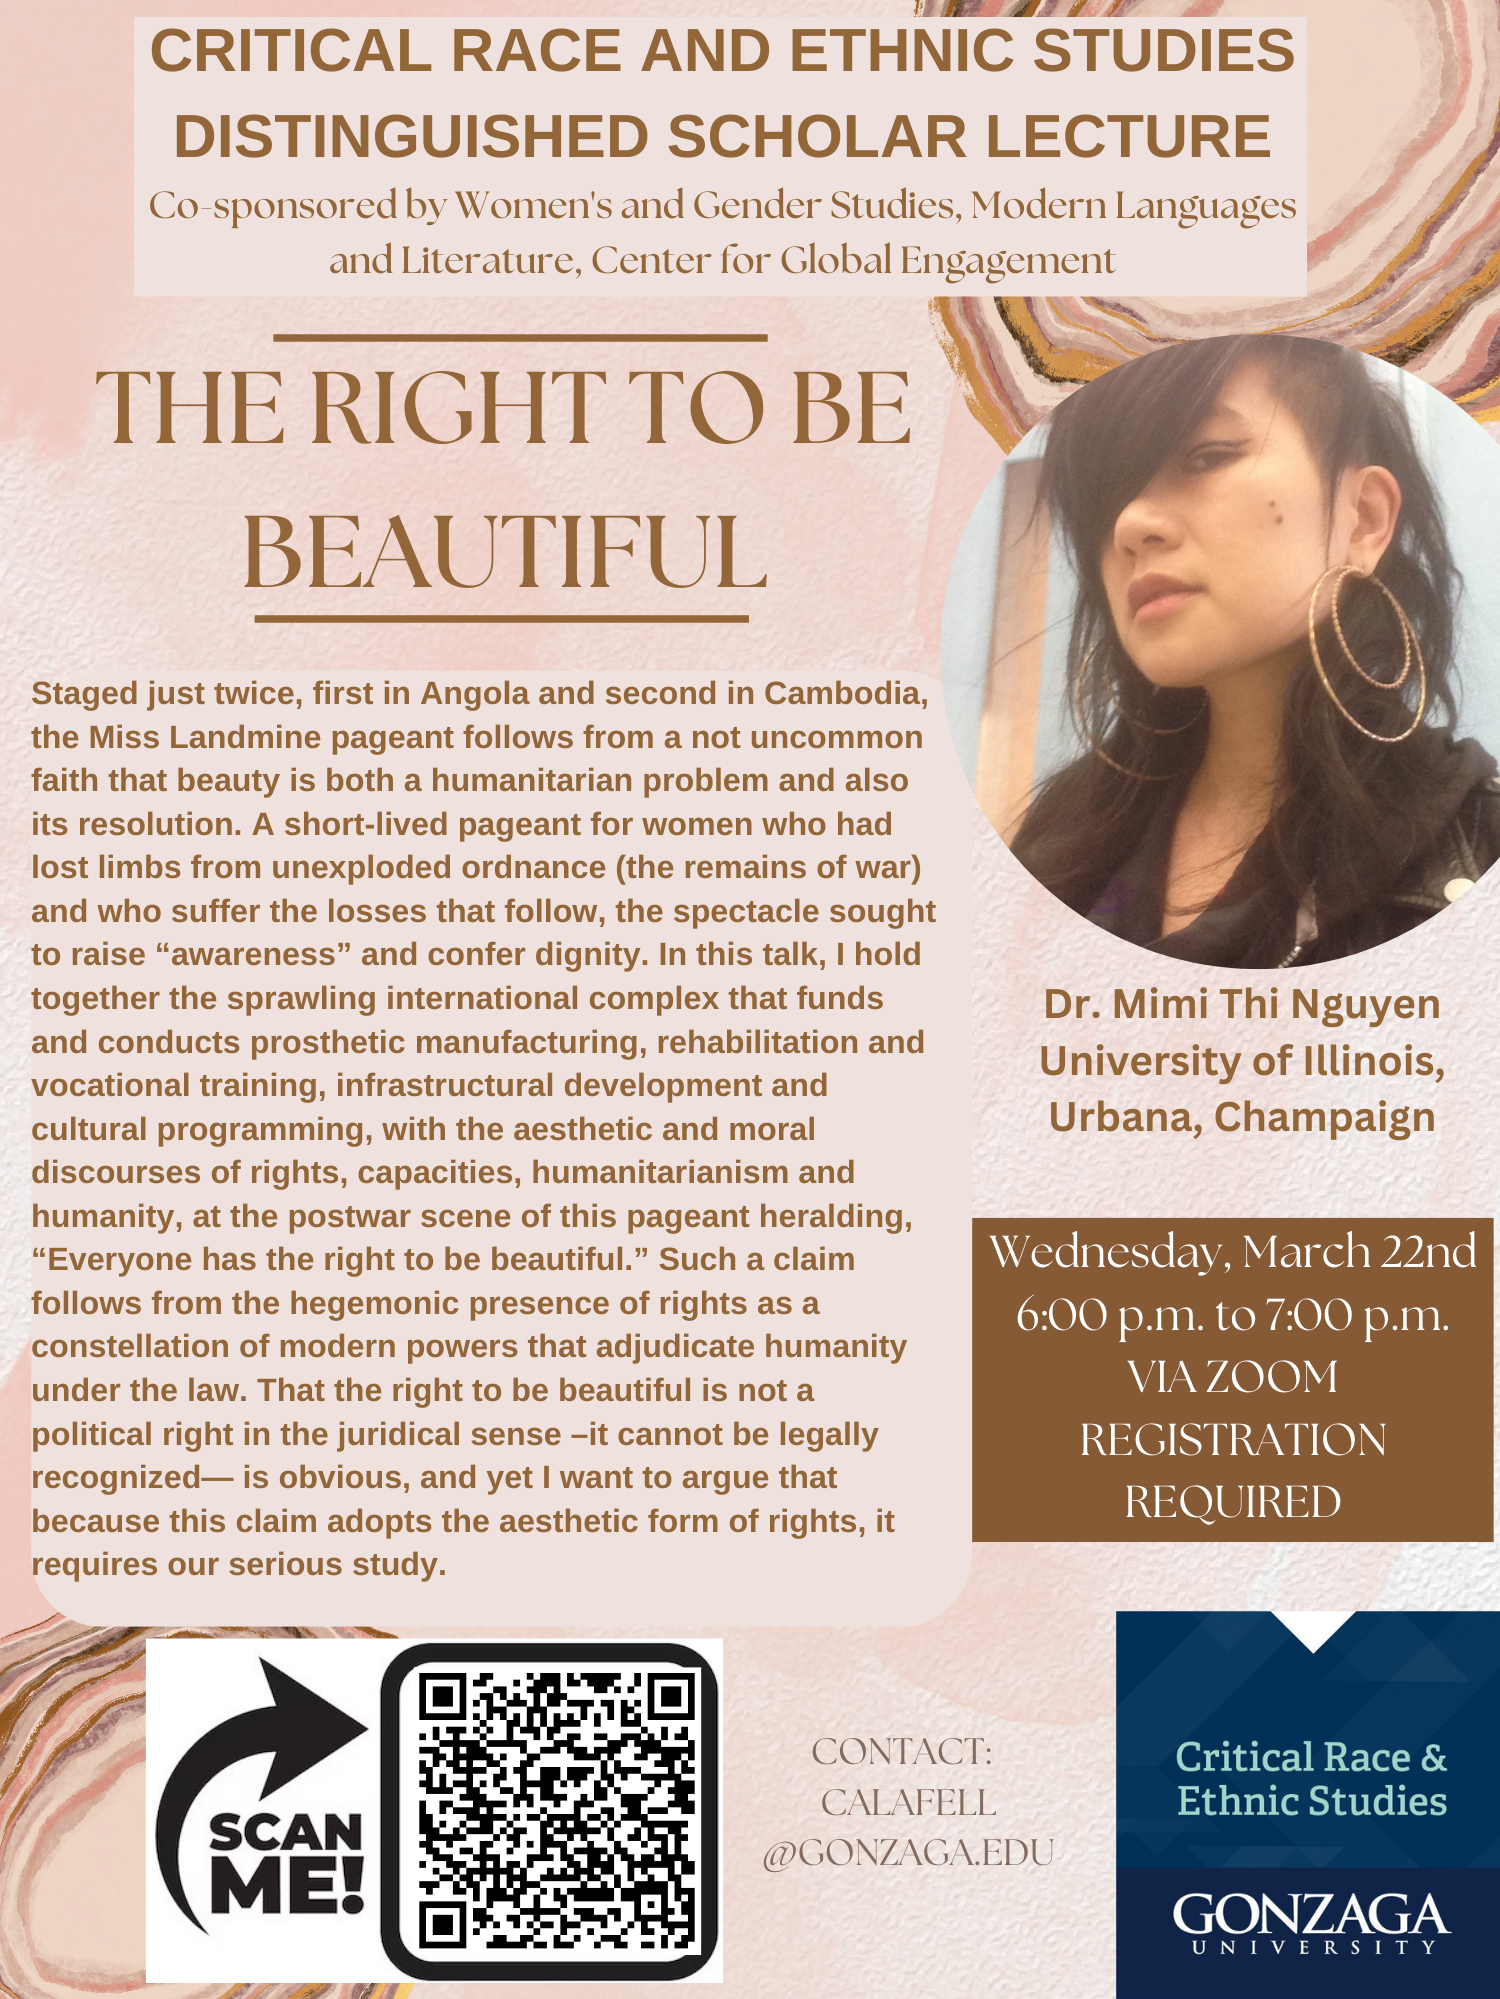 The Right to be Beatuiful lecture flyer with Dr. Nguyen